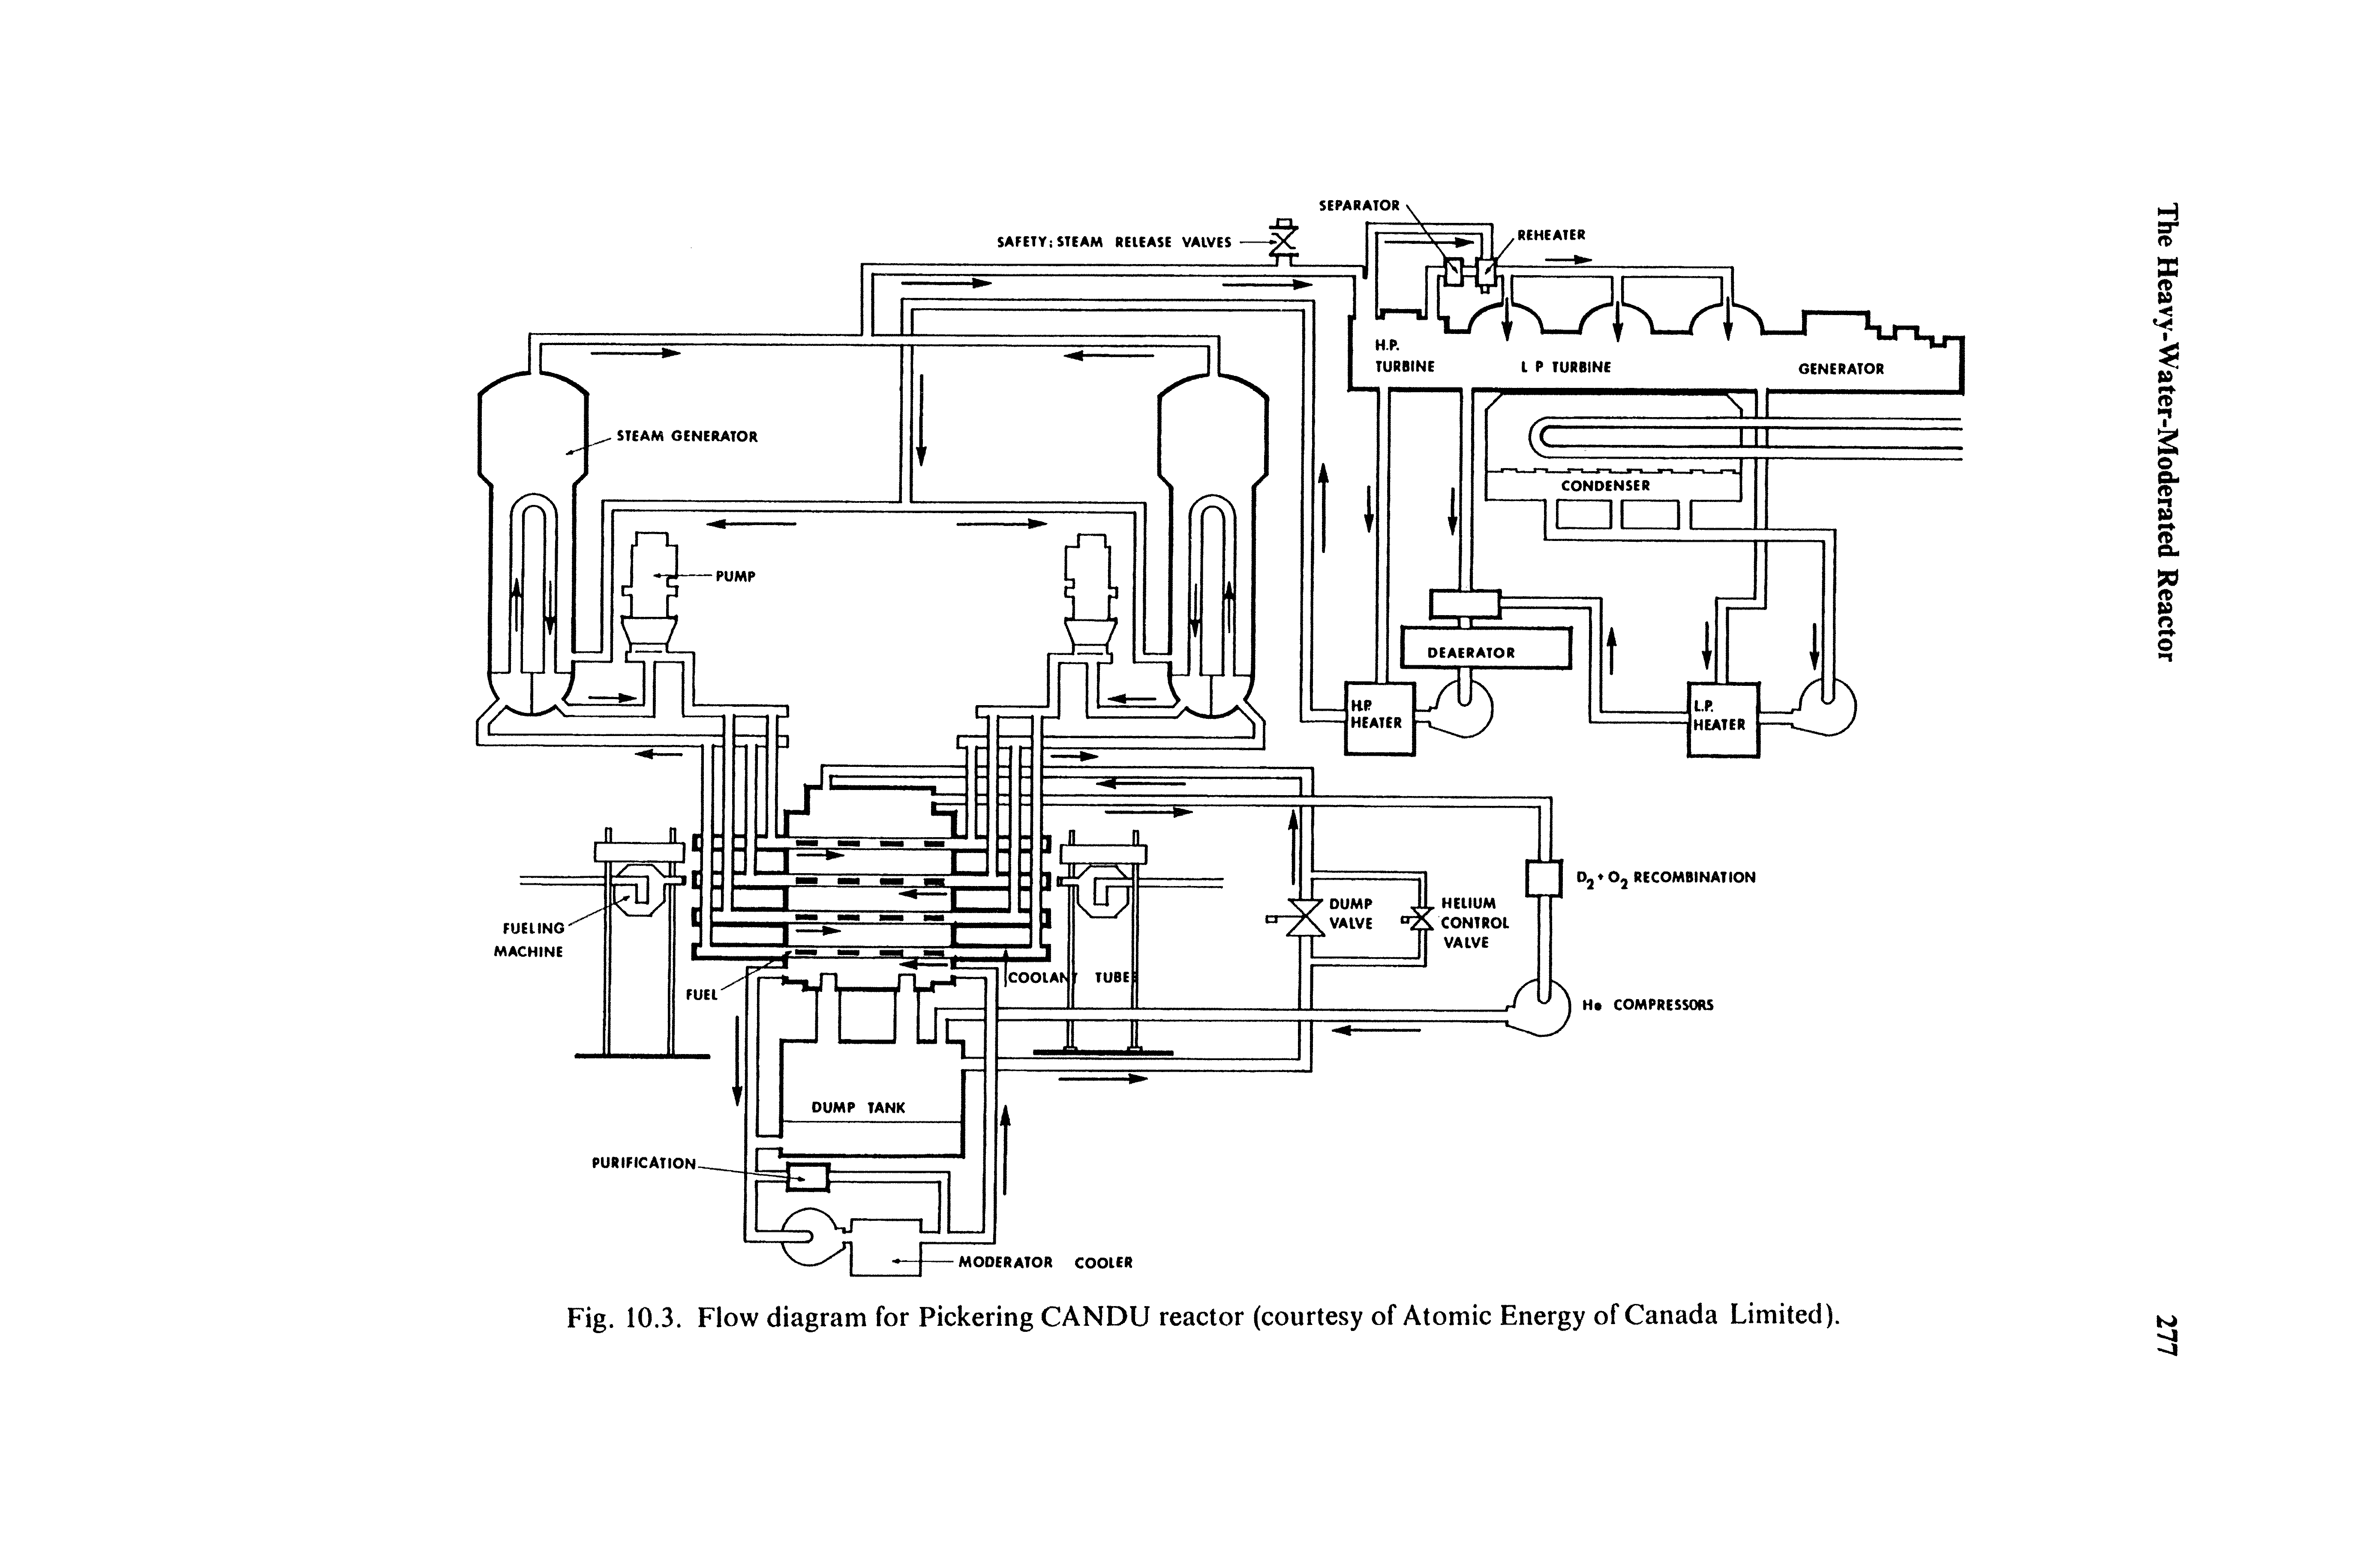 Fig. 10.3. Flow diagram for Pickering CANDU reactor (courtesy of Atomic Energy of Canada Limited).